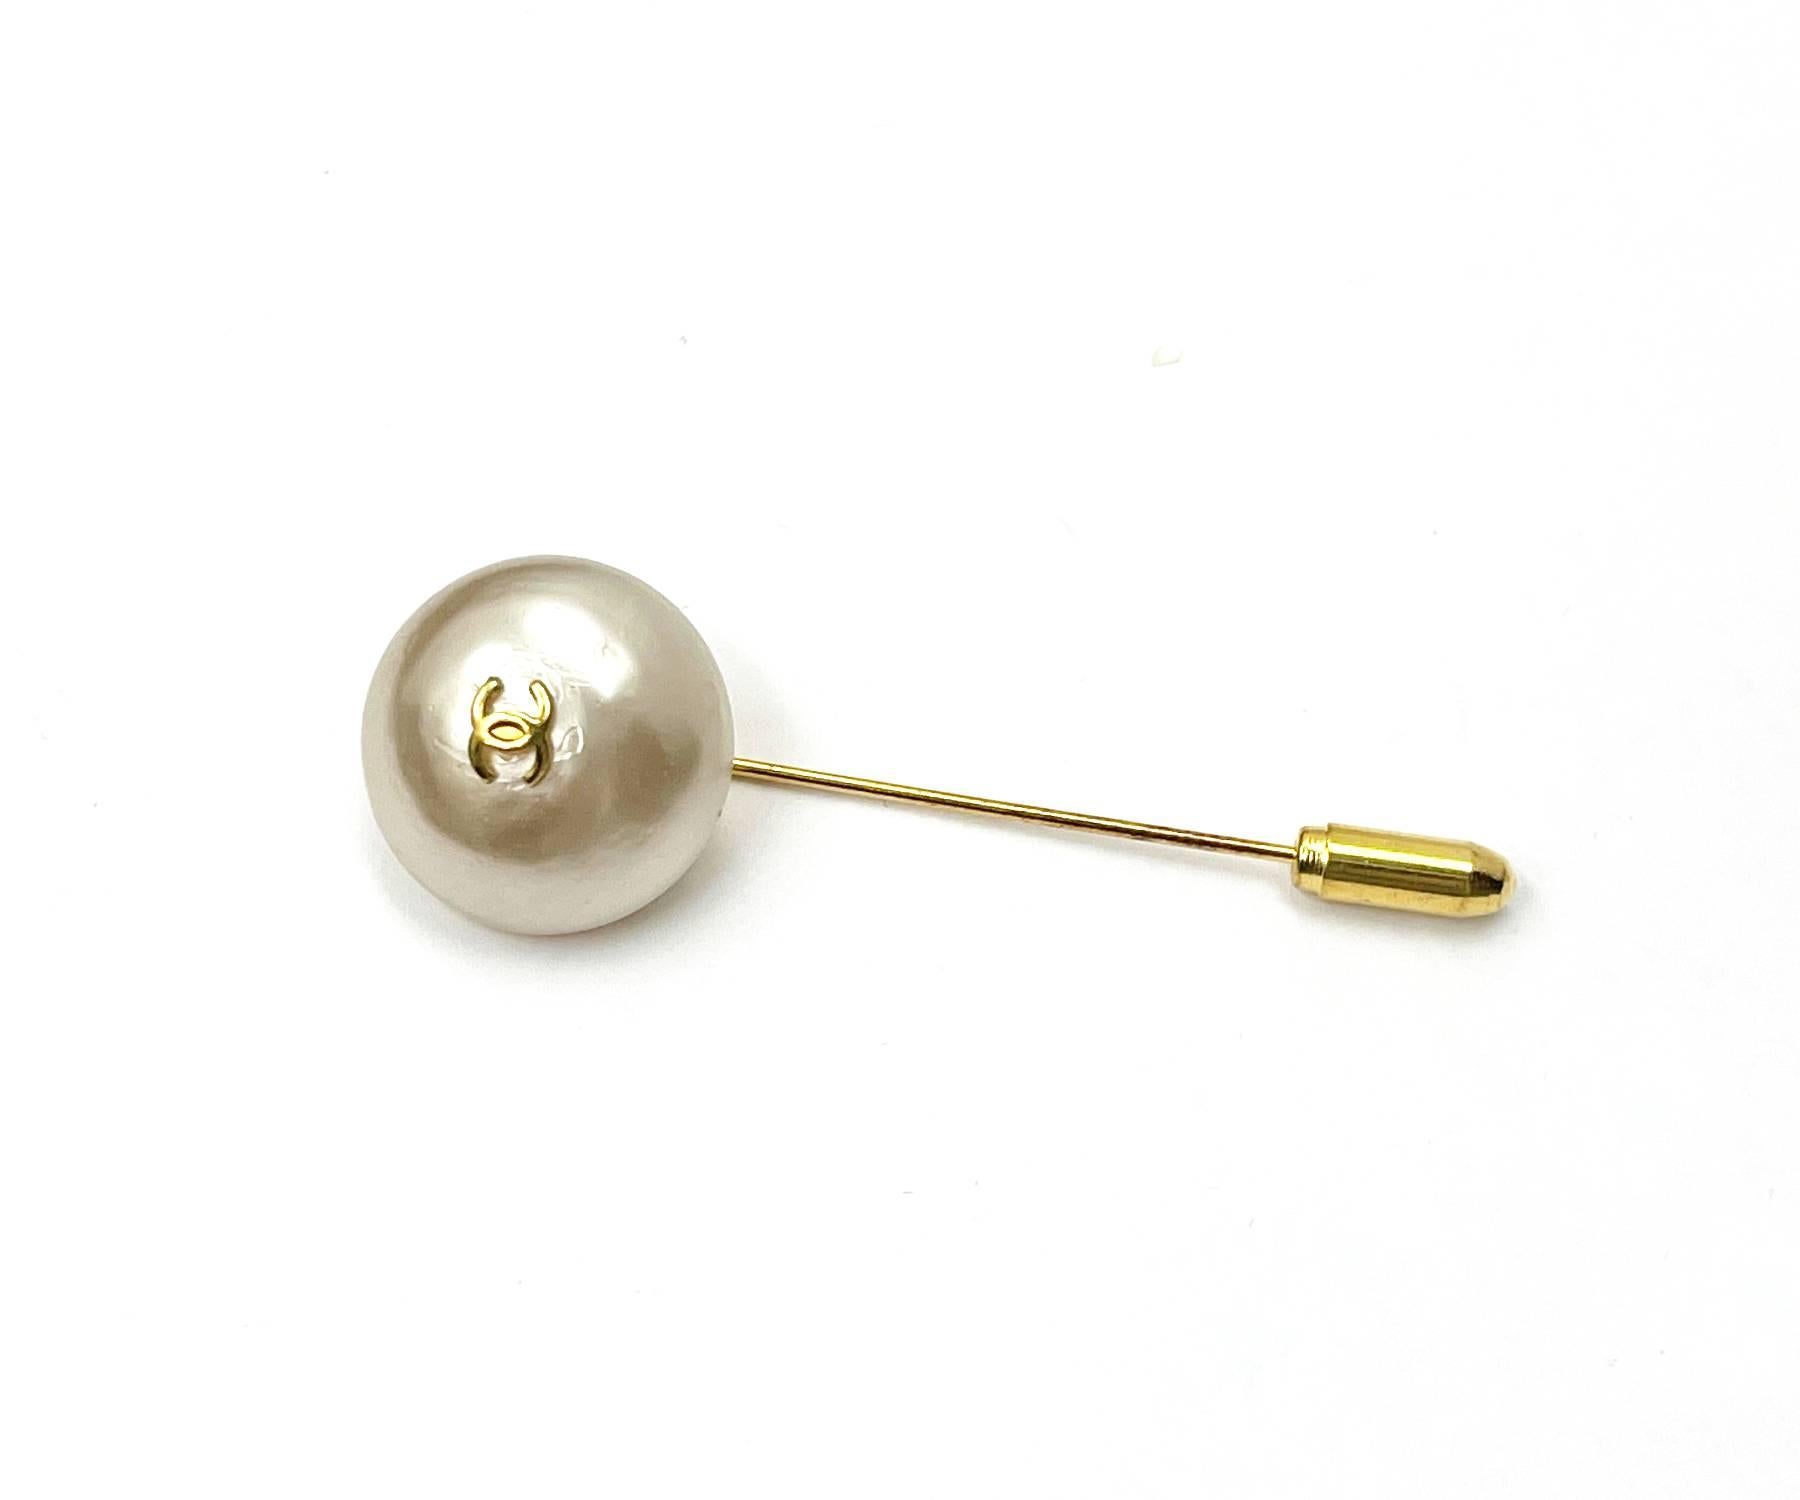 Chanel Vintage Classic Gold Plated CC Faux Pearl Pin

*Marked 95
*Made in France

-Approximately 2